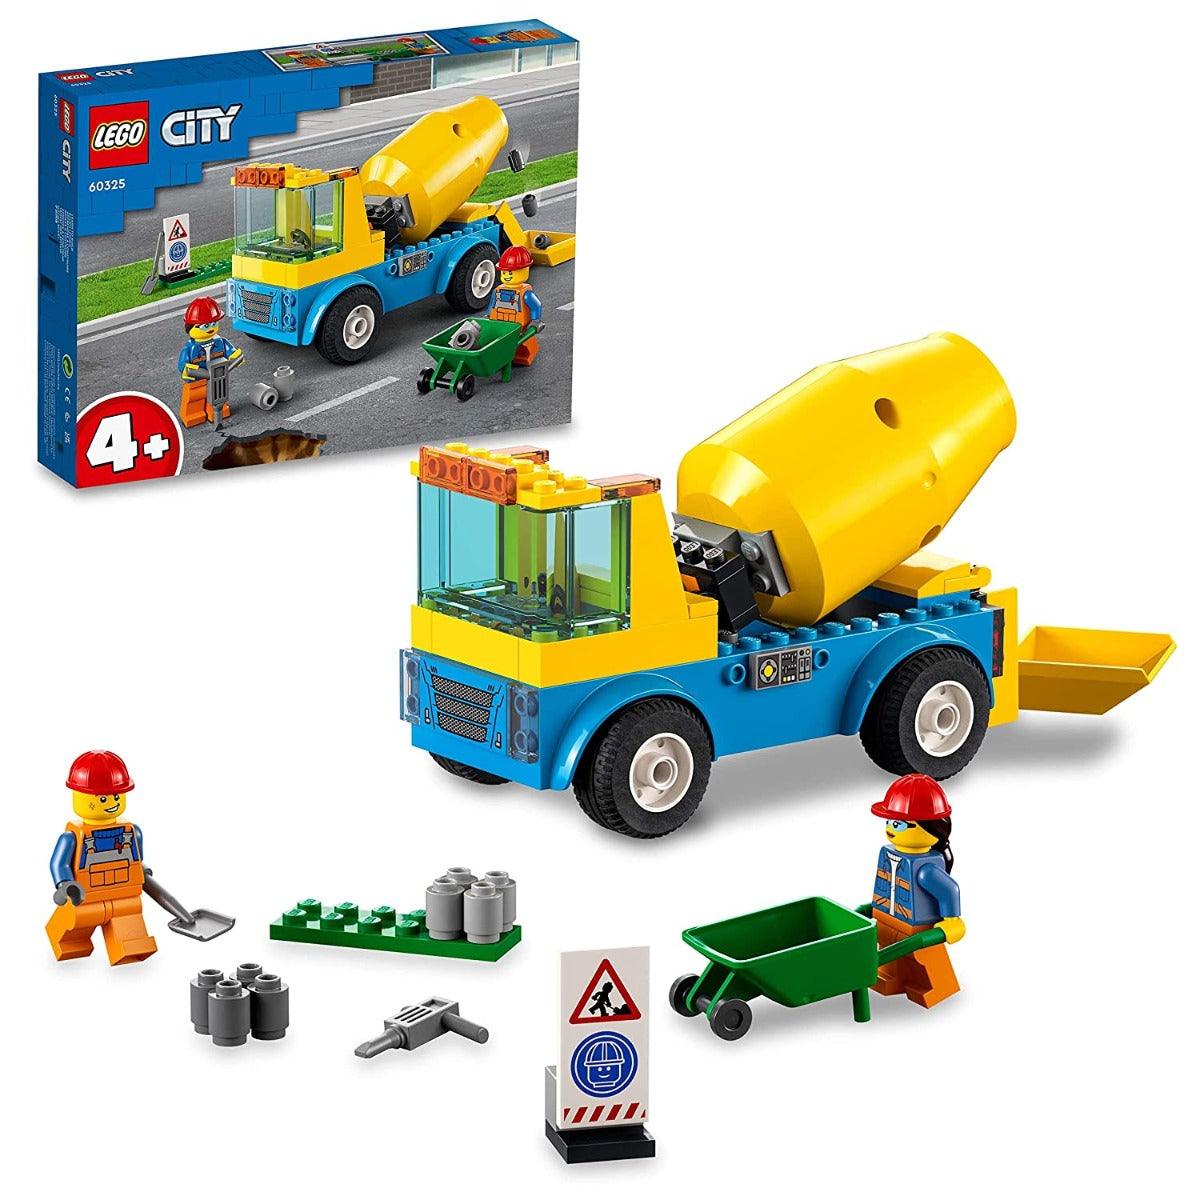 LEGO City Cement Mixer Truck Building Kit for Ages 4+